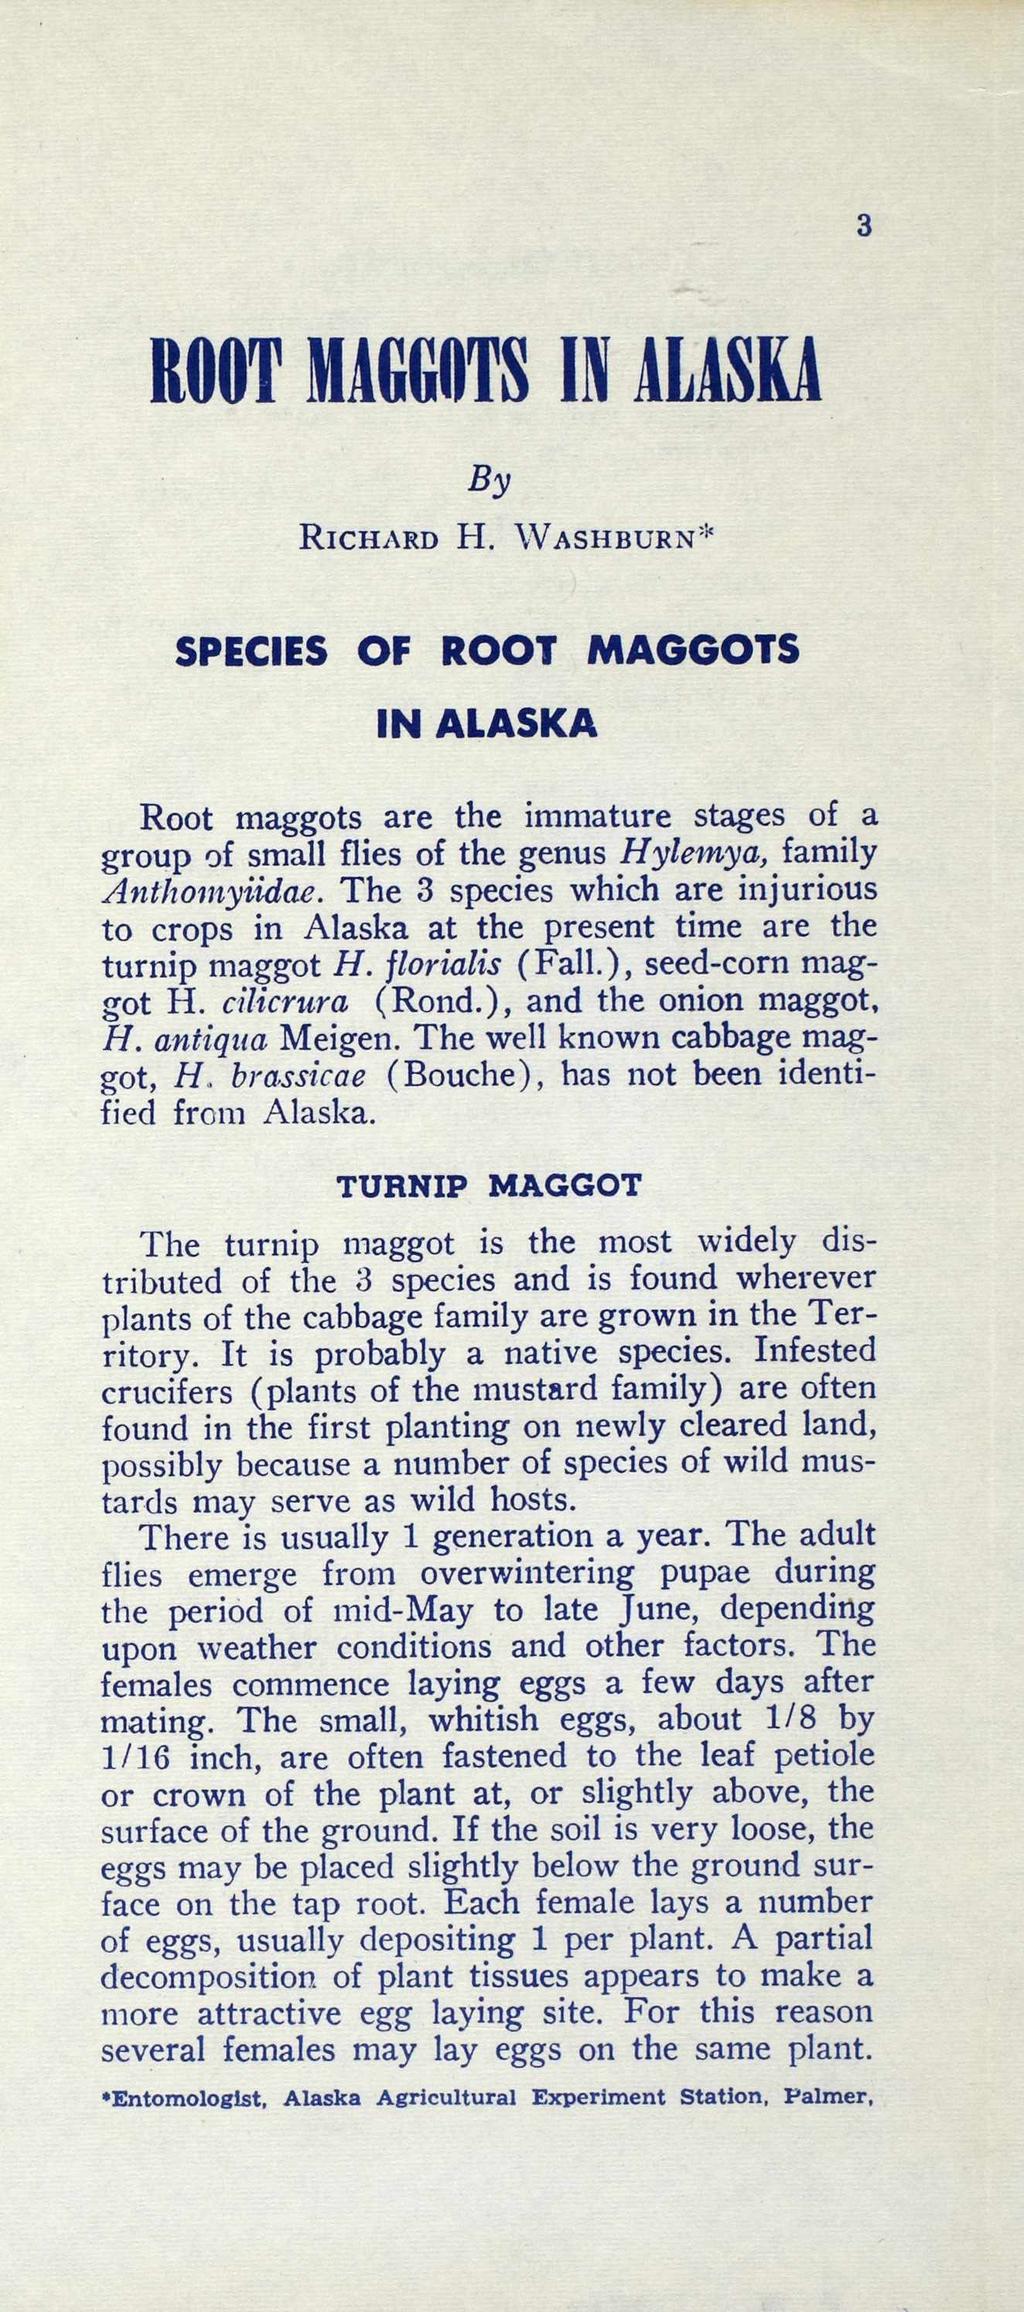 ROOT MAGGOTS IN ALASKA By R ic h a r d H. W a s h b u r n * SPECIES OF ROOT MAGGOTS IN ALASKA Root maggots are the immature stages of a group of small flies of the genus Hylemya, family Anthomyiidae.